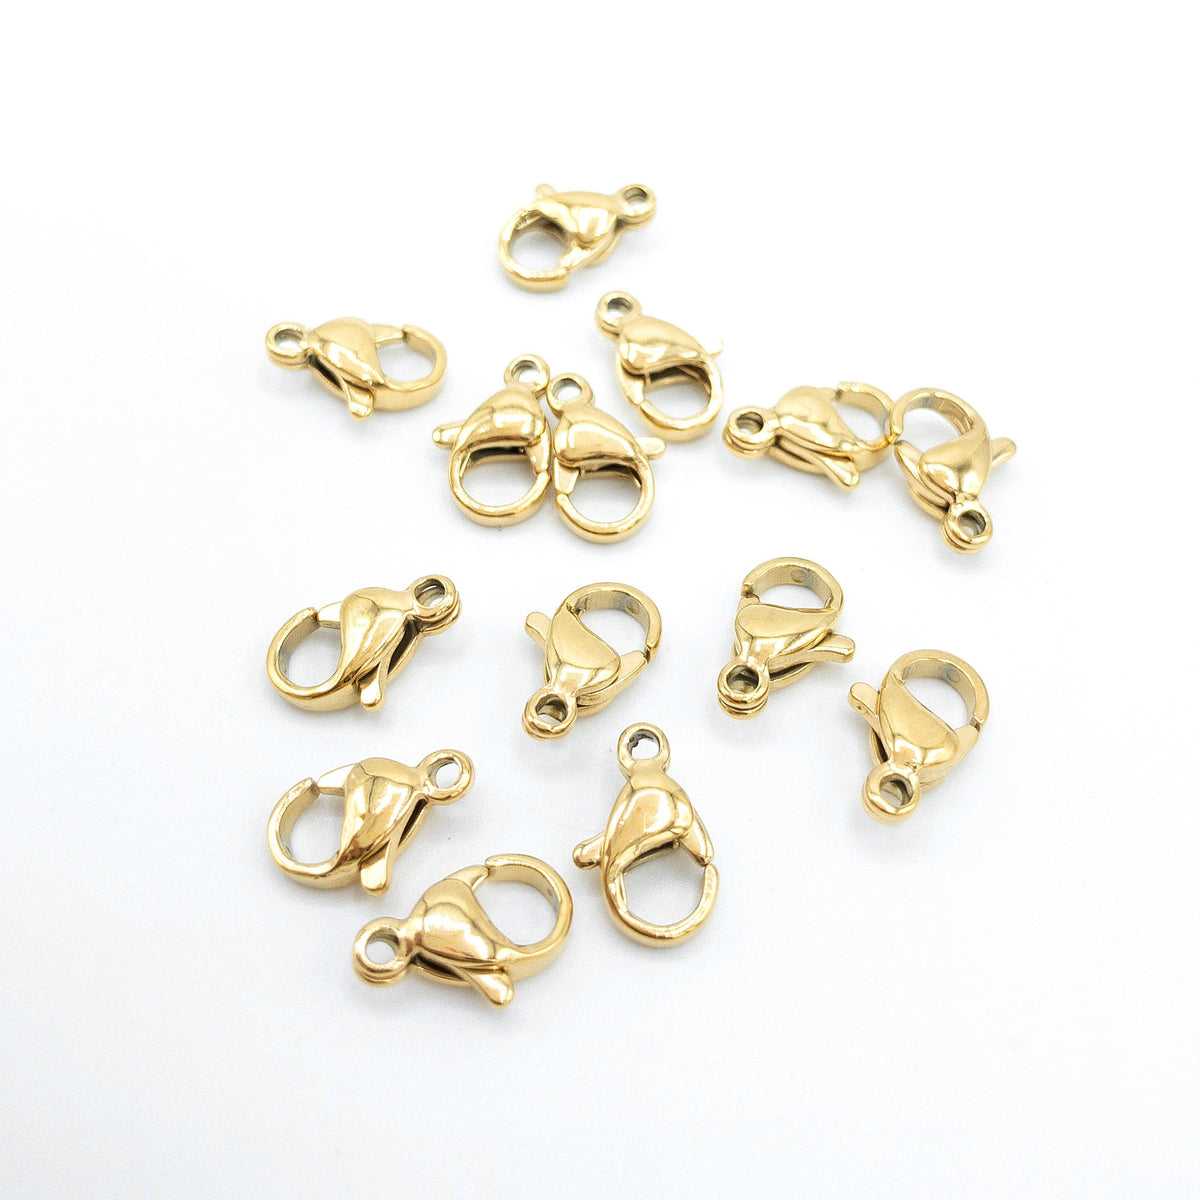 3pcs Gold D-shaped Stainless Steel Lobster Clasp Connectors Parts for  Jewelry Making DIY Findings Wholesale Bulk Items Crafts